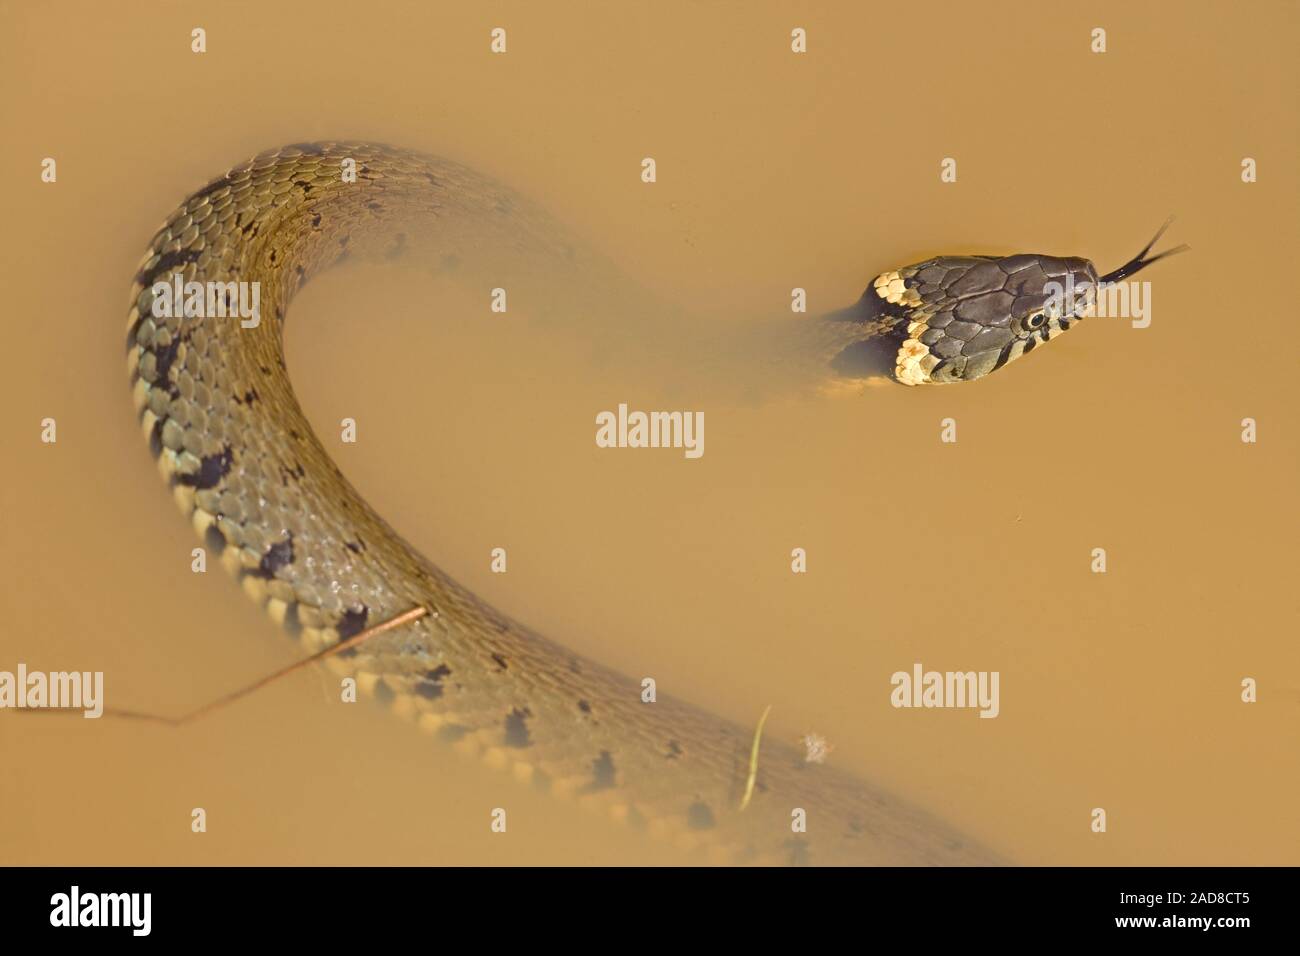 GRASS SNAKE (Natrix natrix ). At pond edge, swimming in shallow water. Showing typical head and collar markings identifying  the species. Stock Photo